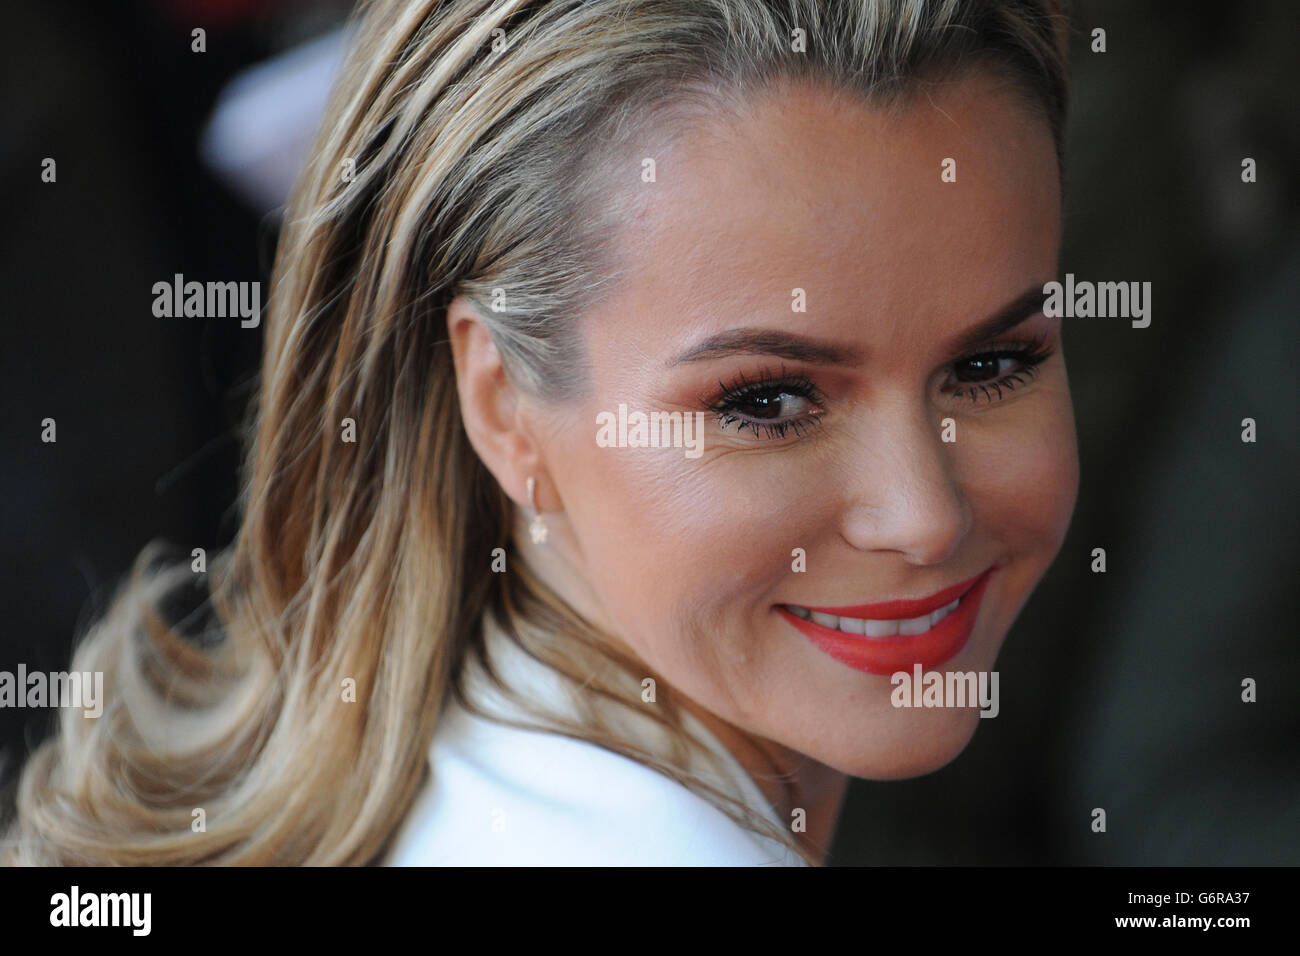 Britain's Got Talent judge Amanda Holden arrives for auditions at the ...